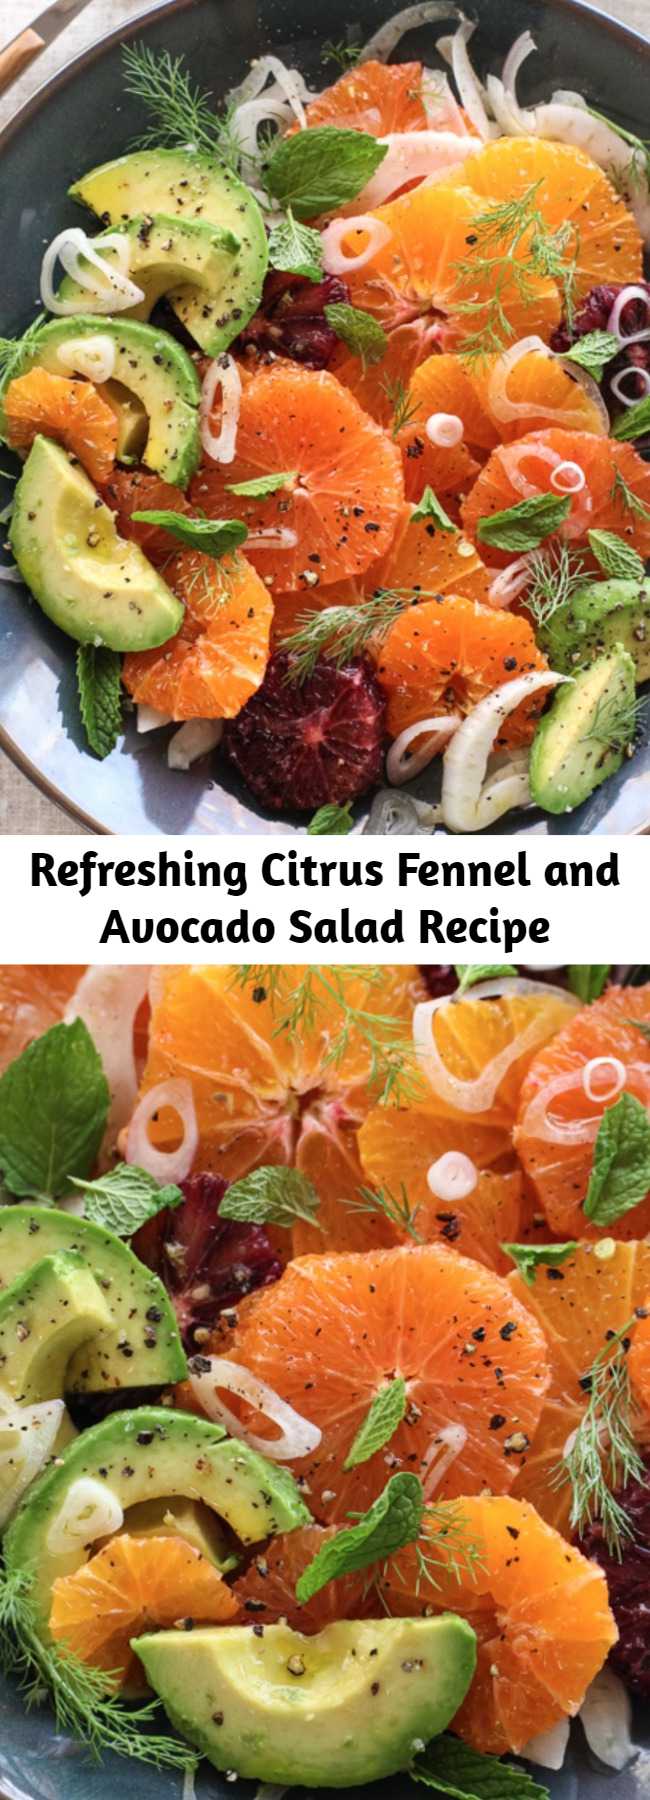 Refreshing Citrus Fennel and Avocado Salad Recipe - Now, I’ve made renditions of this recipe plenty of times in the past, but never with this many different styles of antioxidant-filled, Vitamin C-packed, oranges.